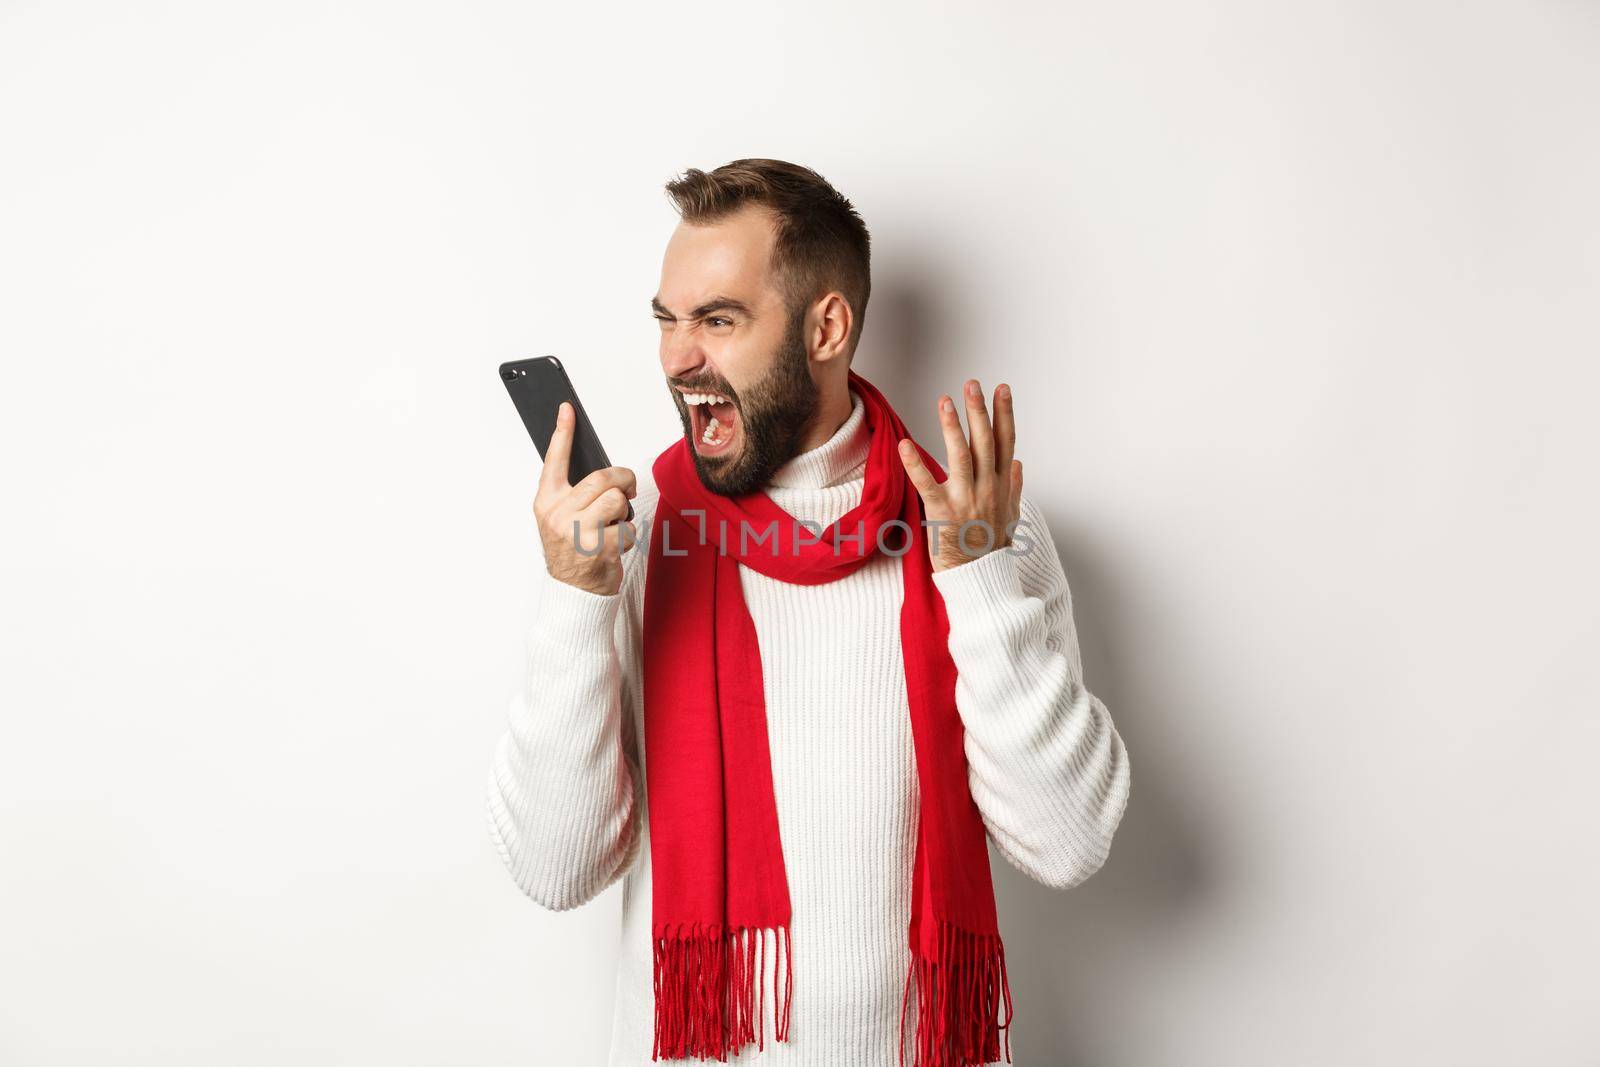 Angry man shouting at smartphone with mad face, standing furious against white background.